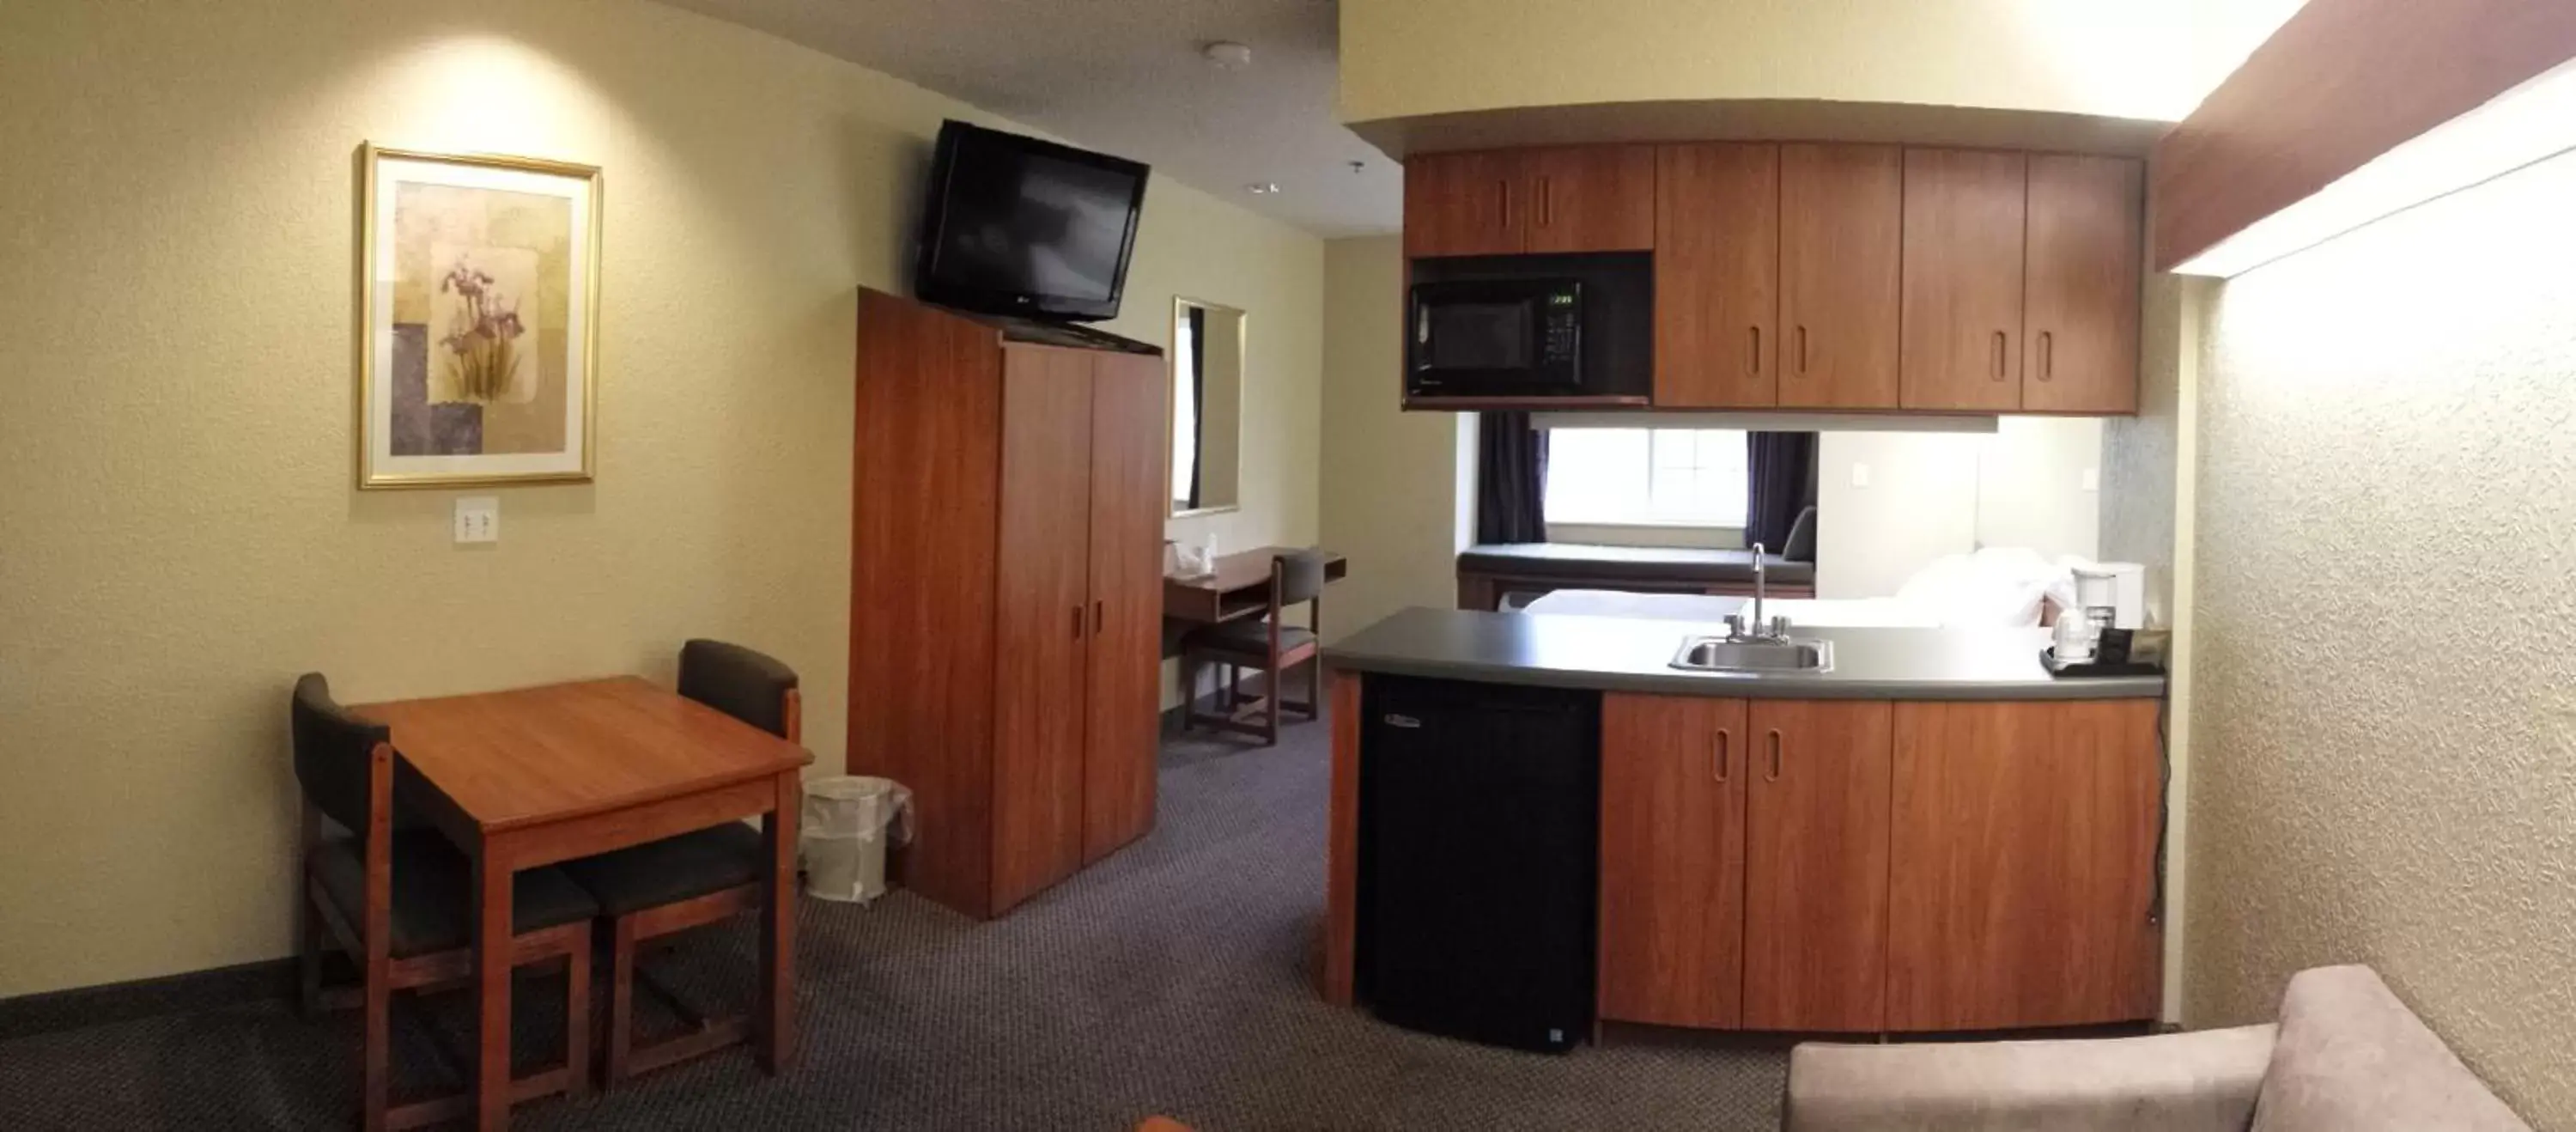 Shower, Kitchen/Kitchenette in Microtel Inn & Suites Beckley East